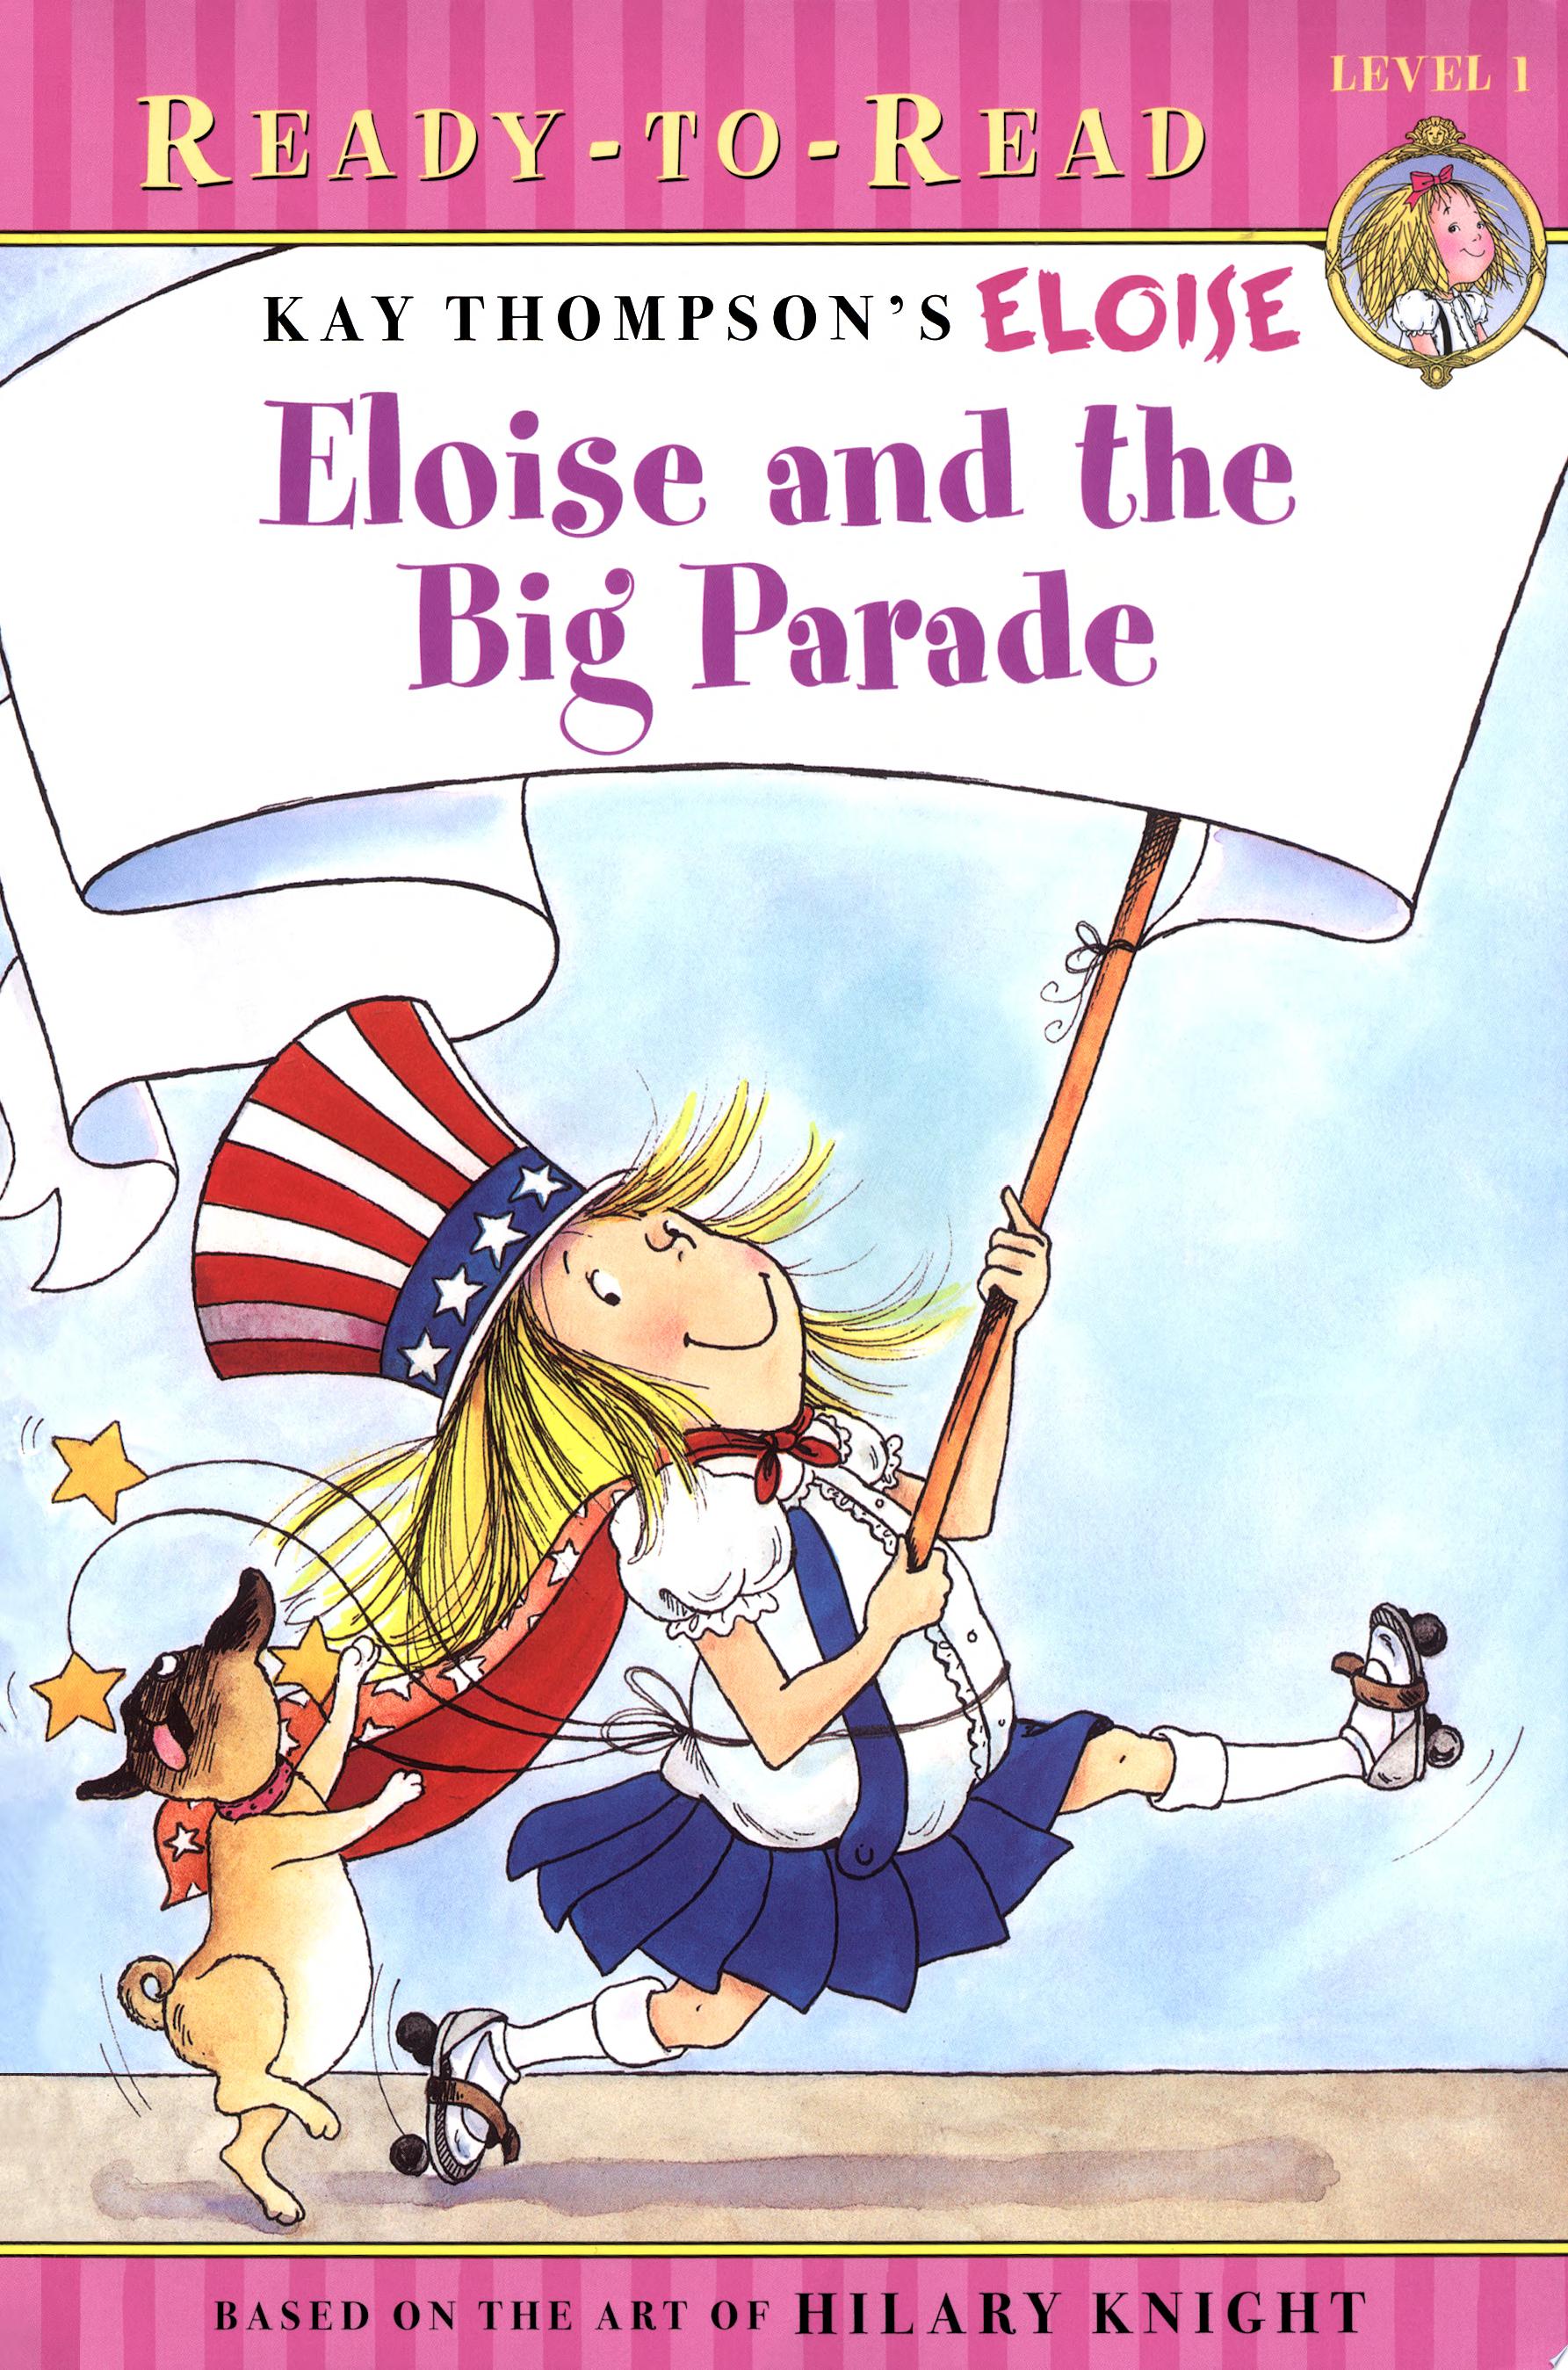 Image for "Eloise and the Big Parade"